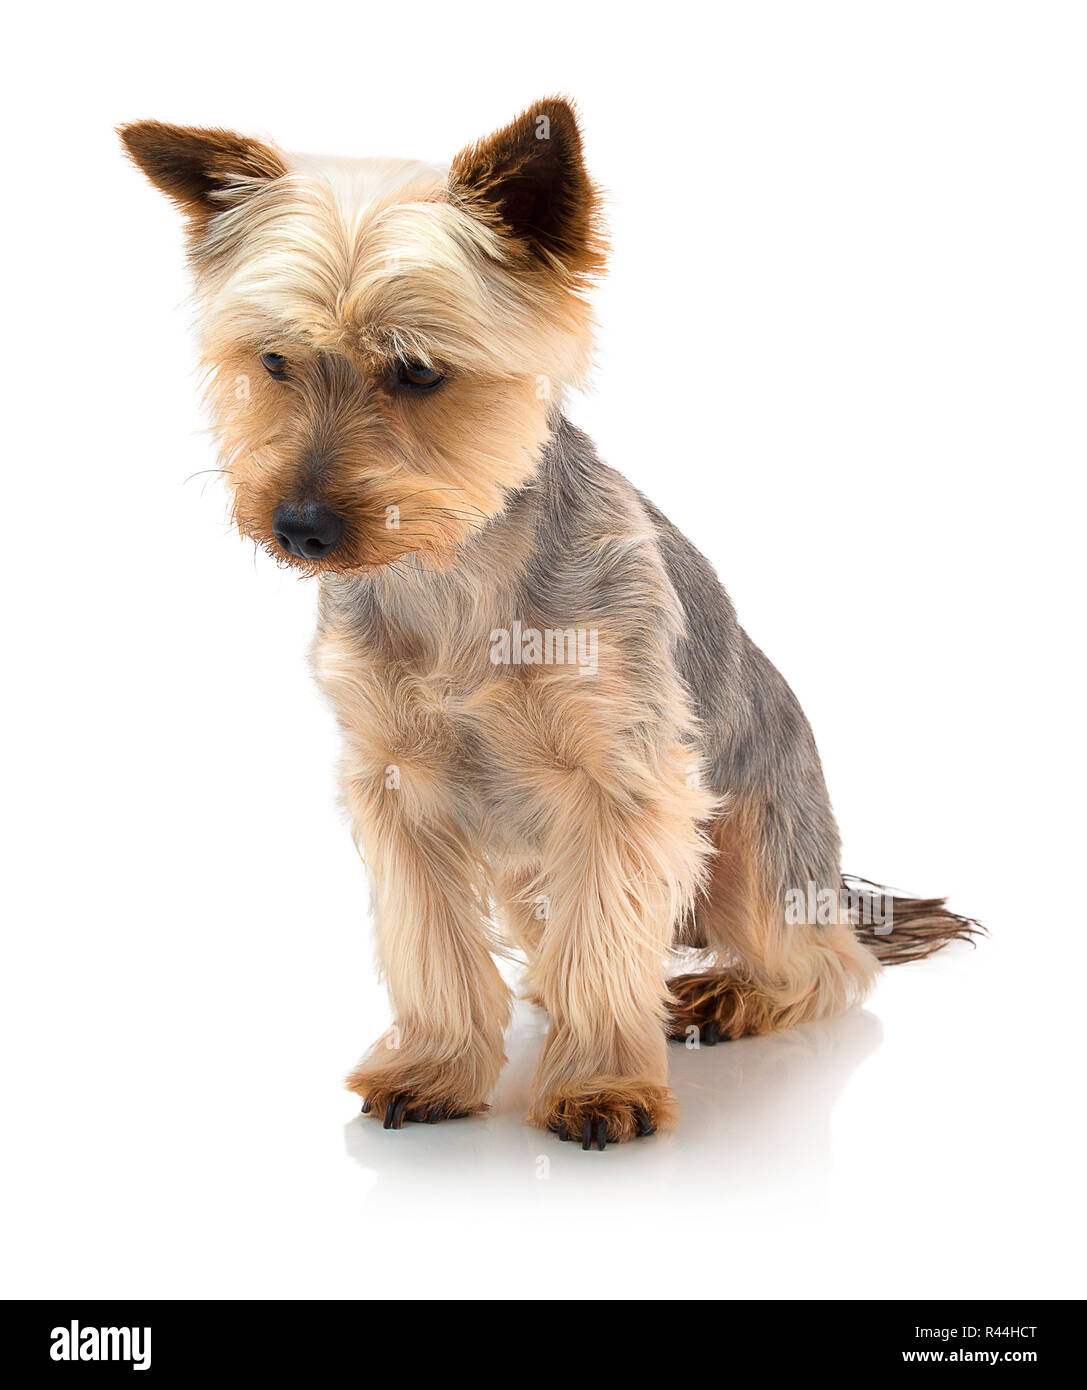 An adorable Australian silky terrier sitting against a white background with shadow reflection. Dog sitting on white underlay. Stock Photo